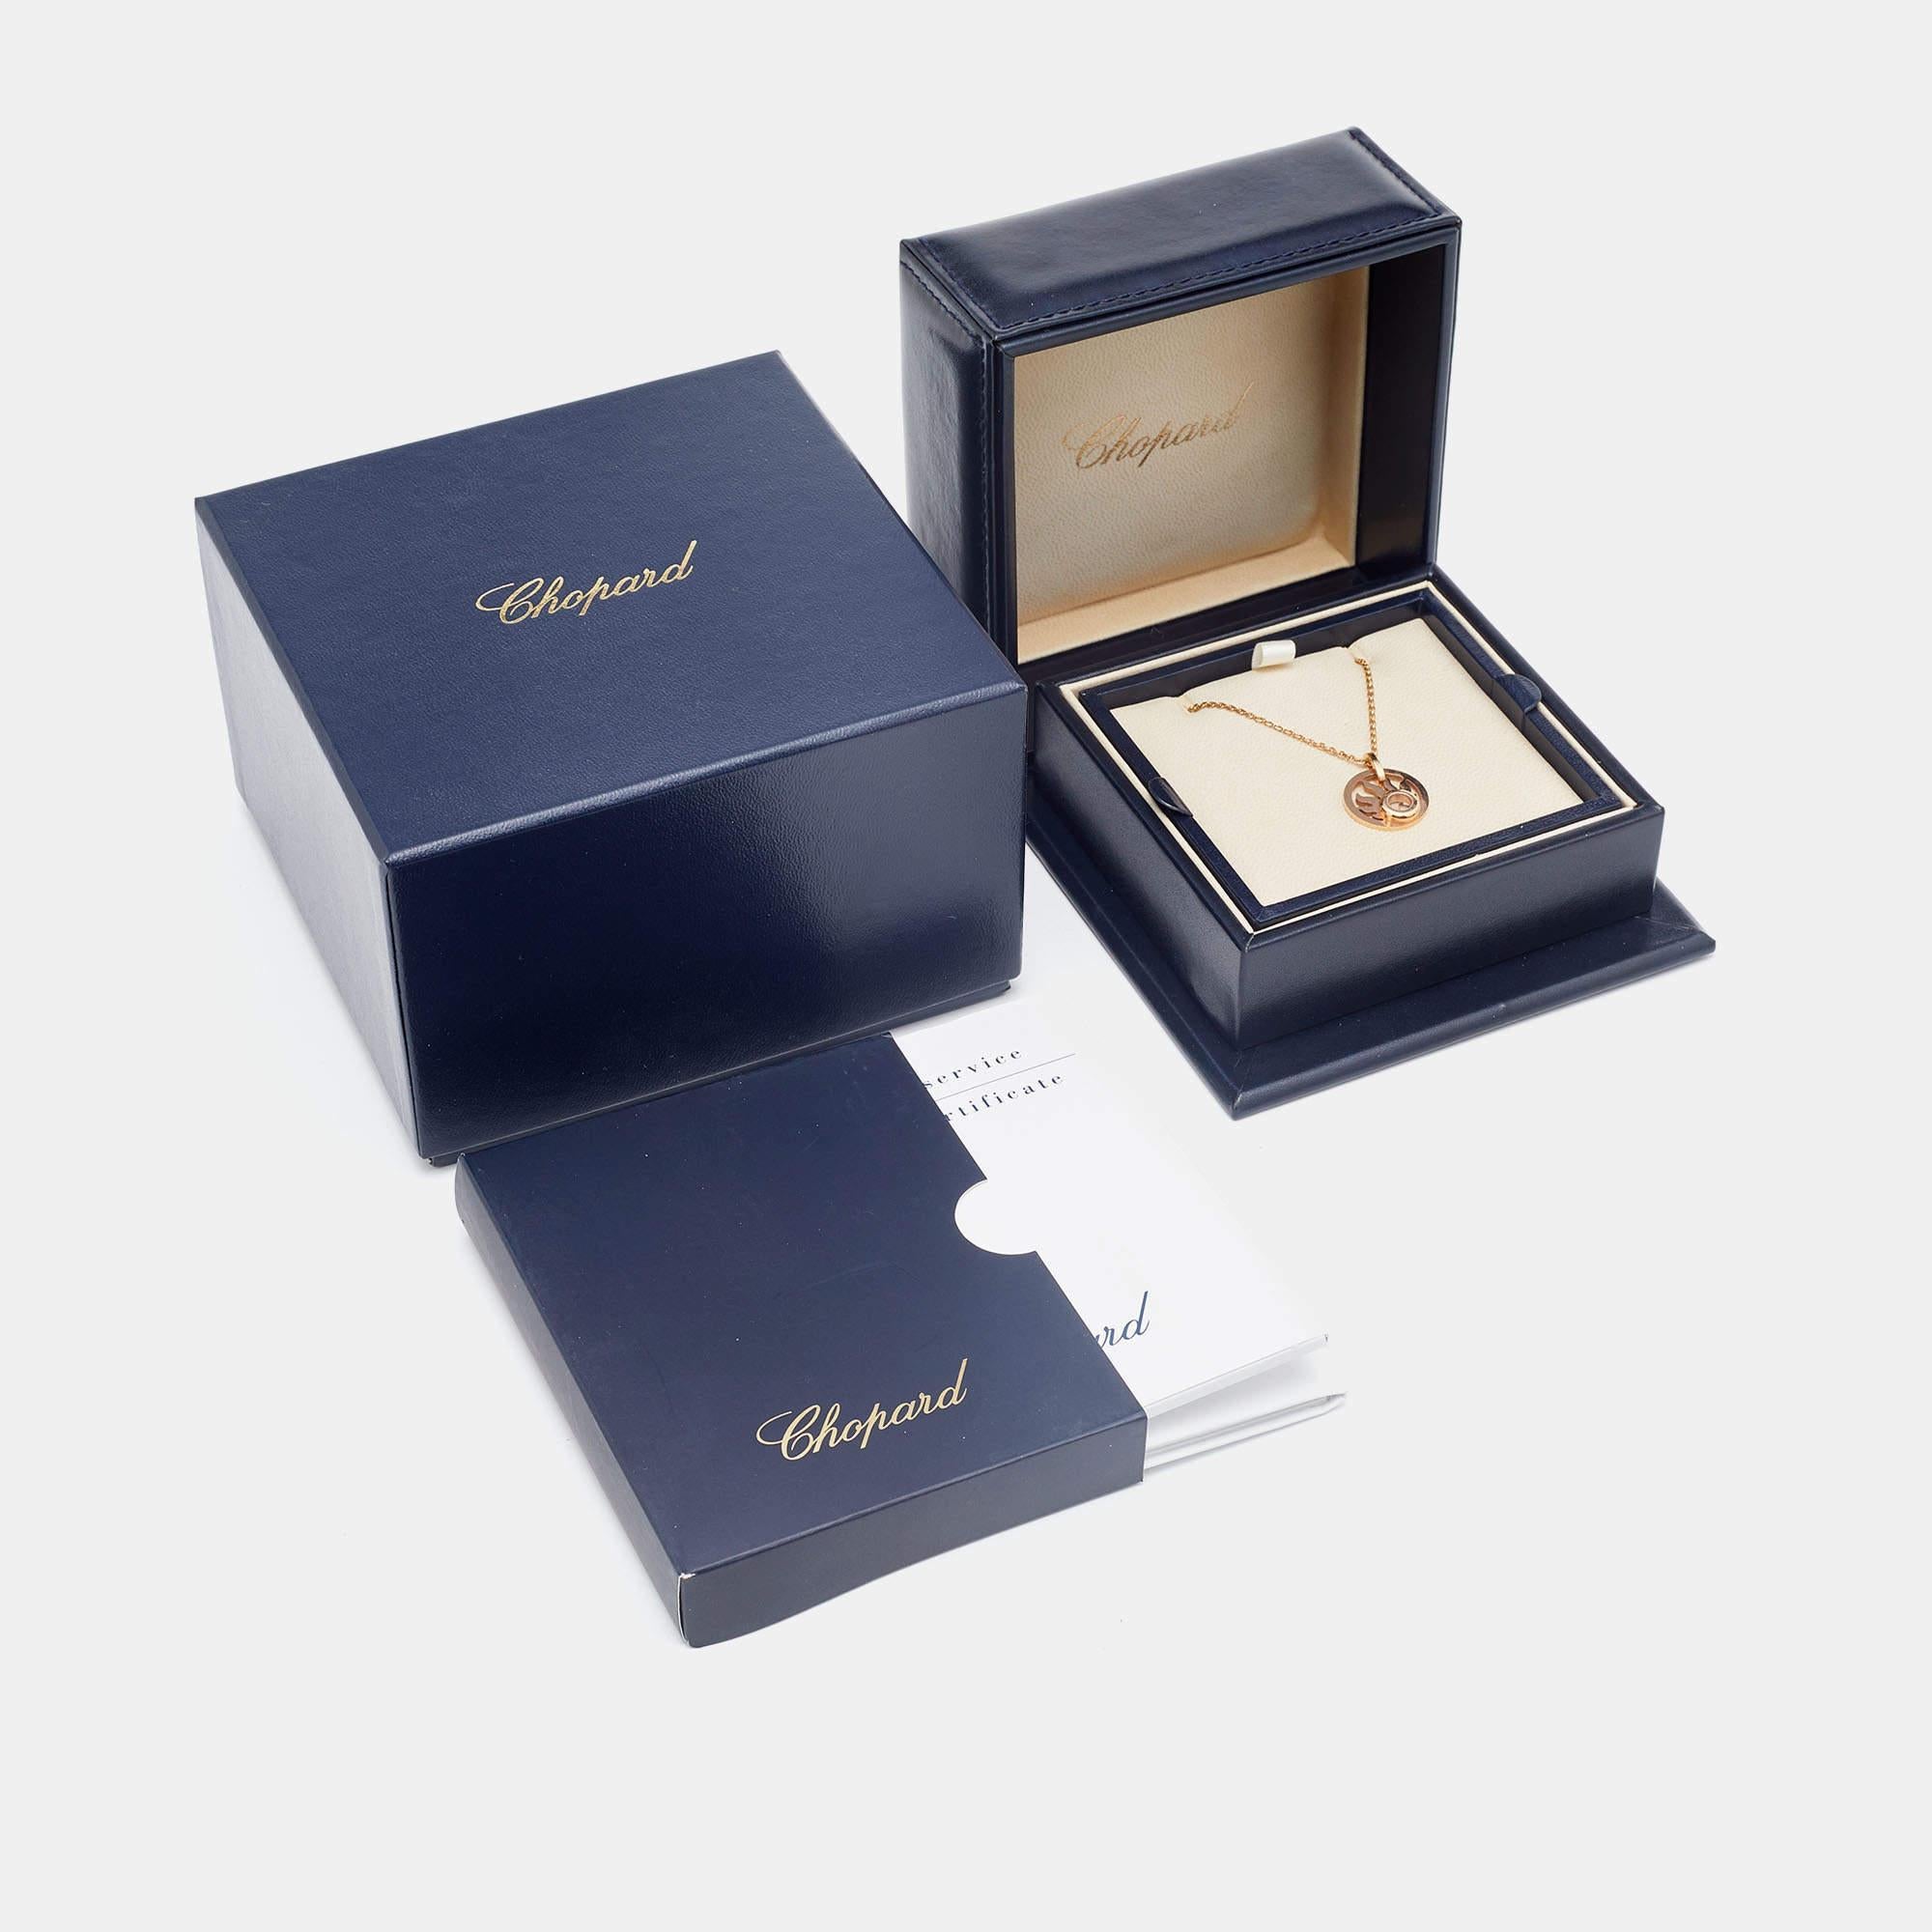 This necklace from Chopard imparts elegance through its distinctive design. It speaks of impeccable style and ultimate luxury. Flaunt your discerning fashion taste by buying this Happy Sun beauty today!

Includes: Authenticity Card, Original Box,